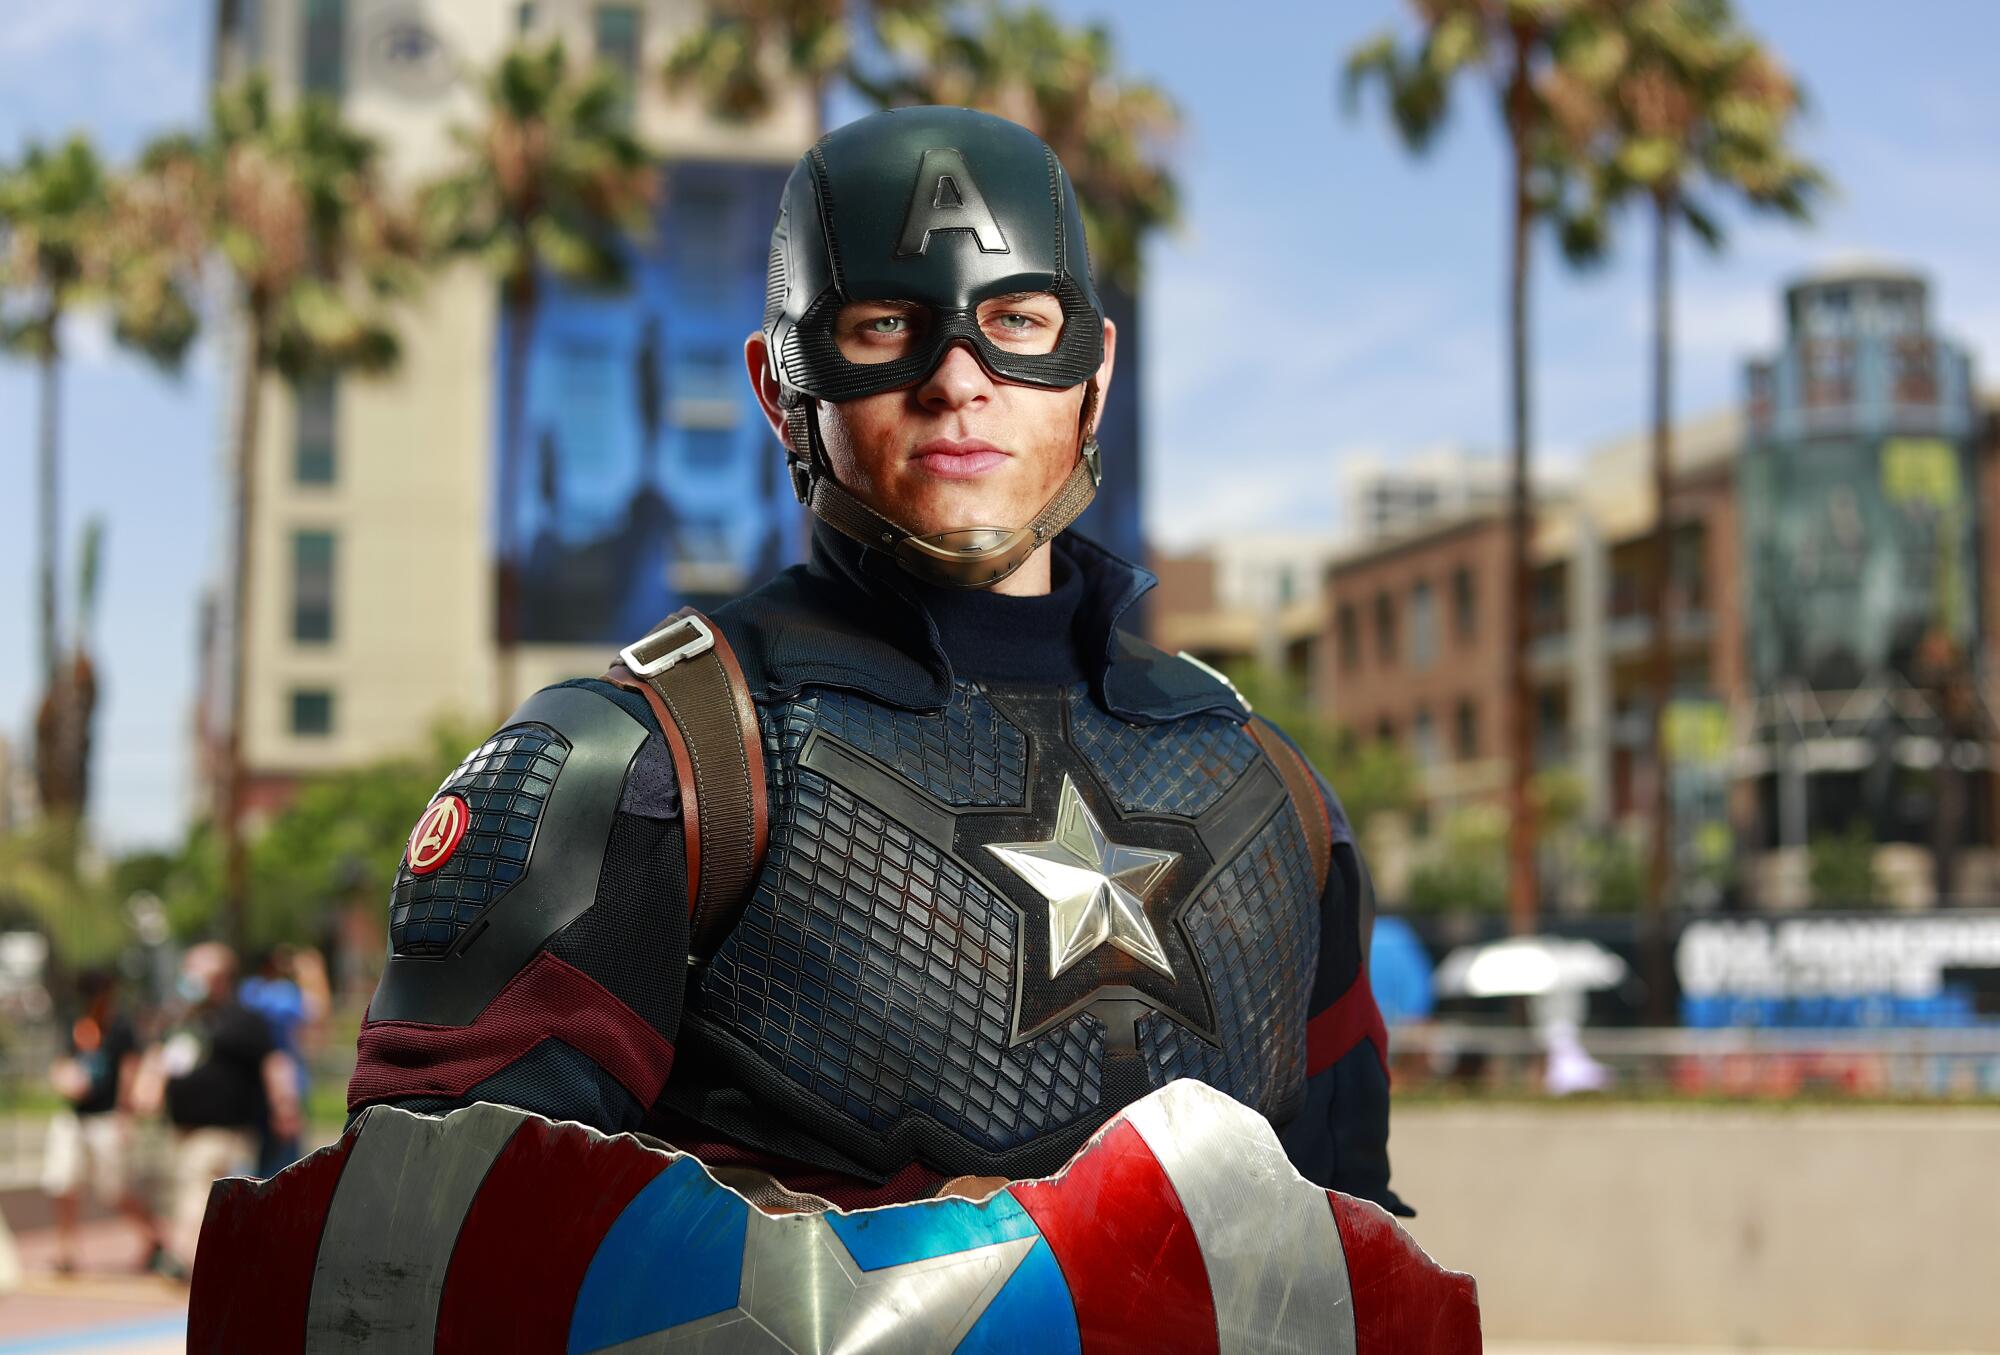 Ryan Betz of Poway dressed as Captain America at Comic-Con.